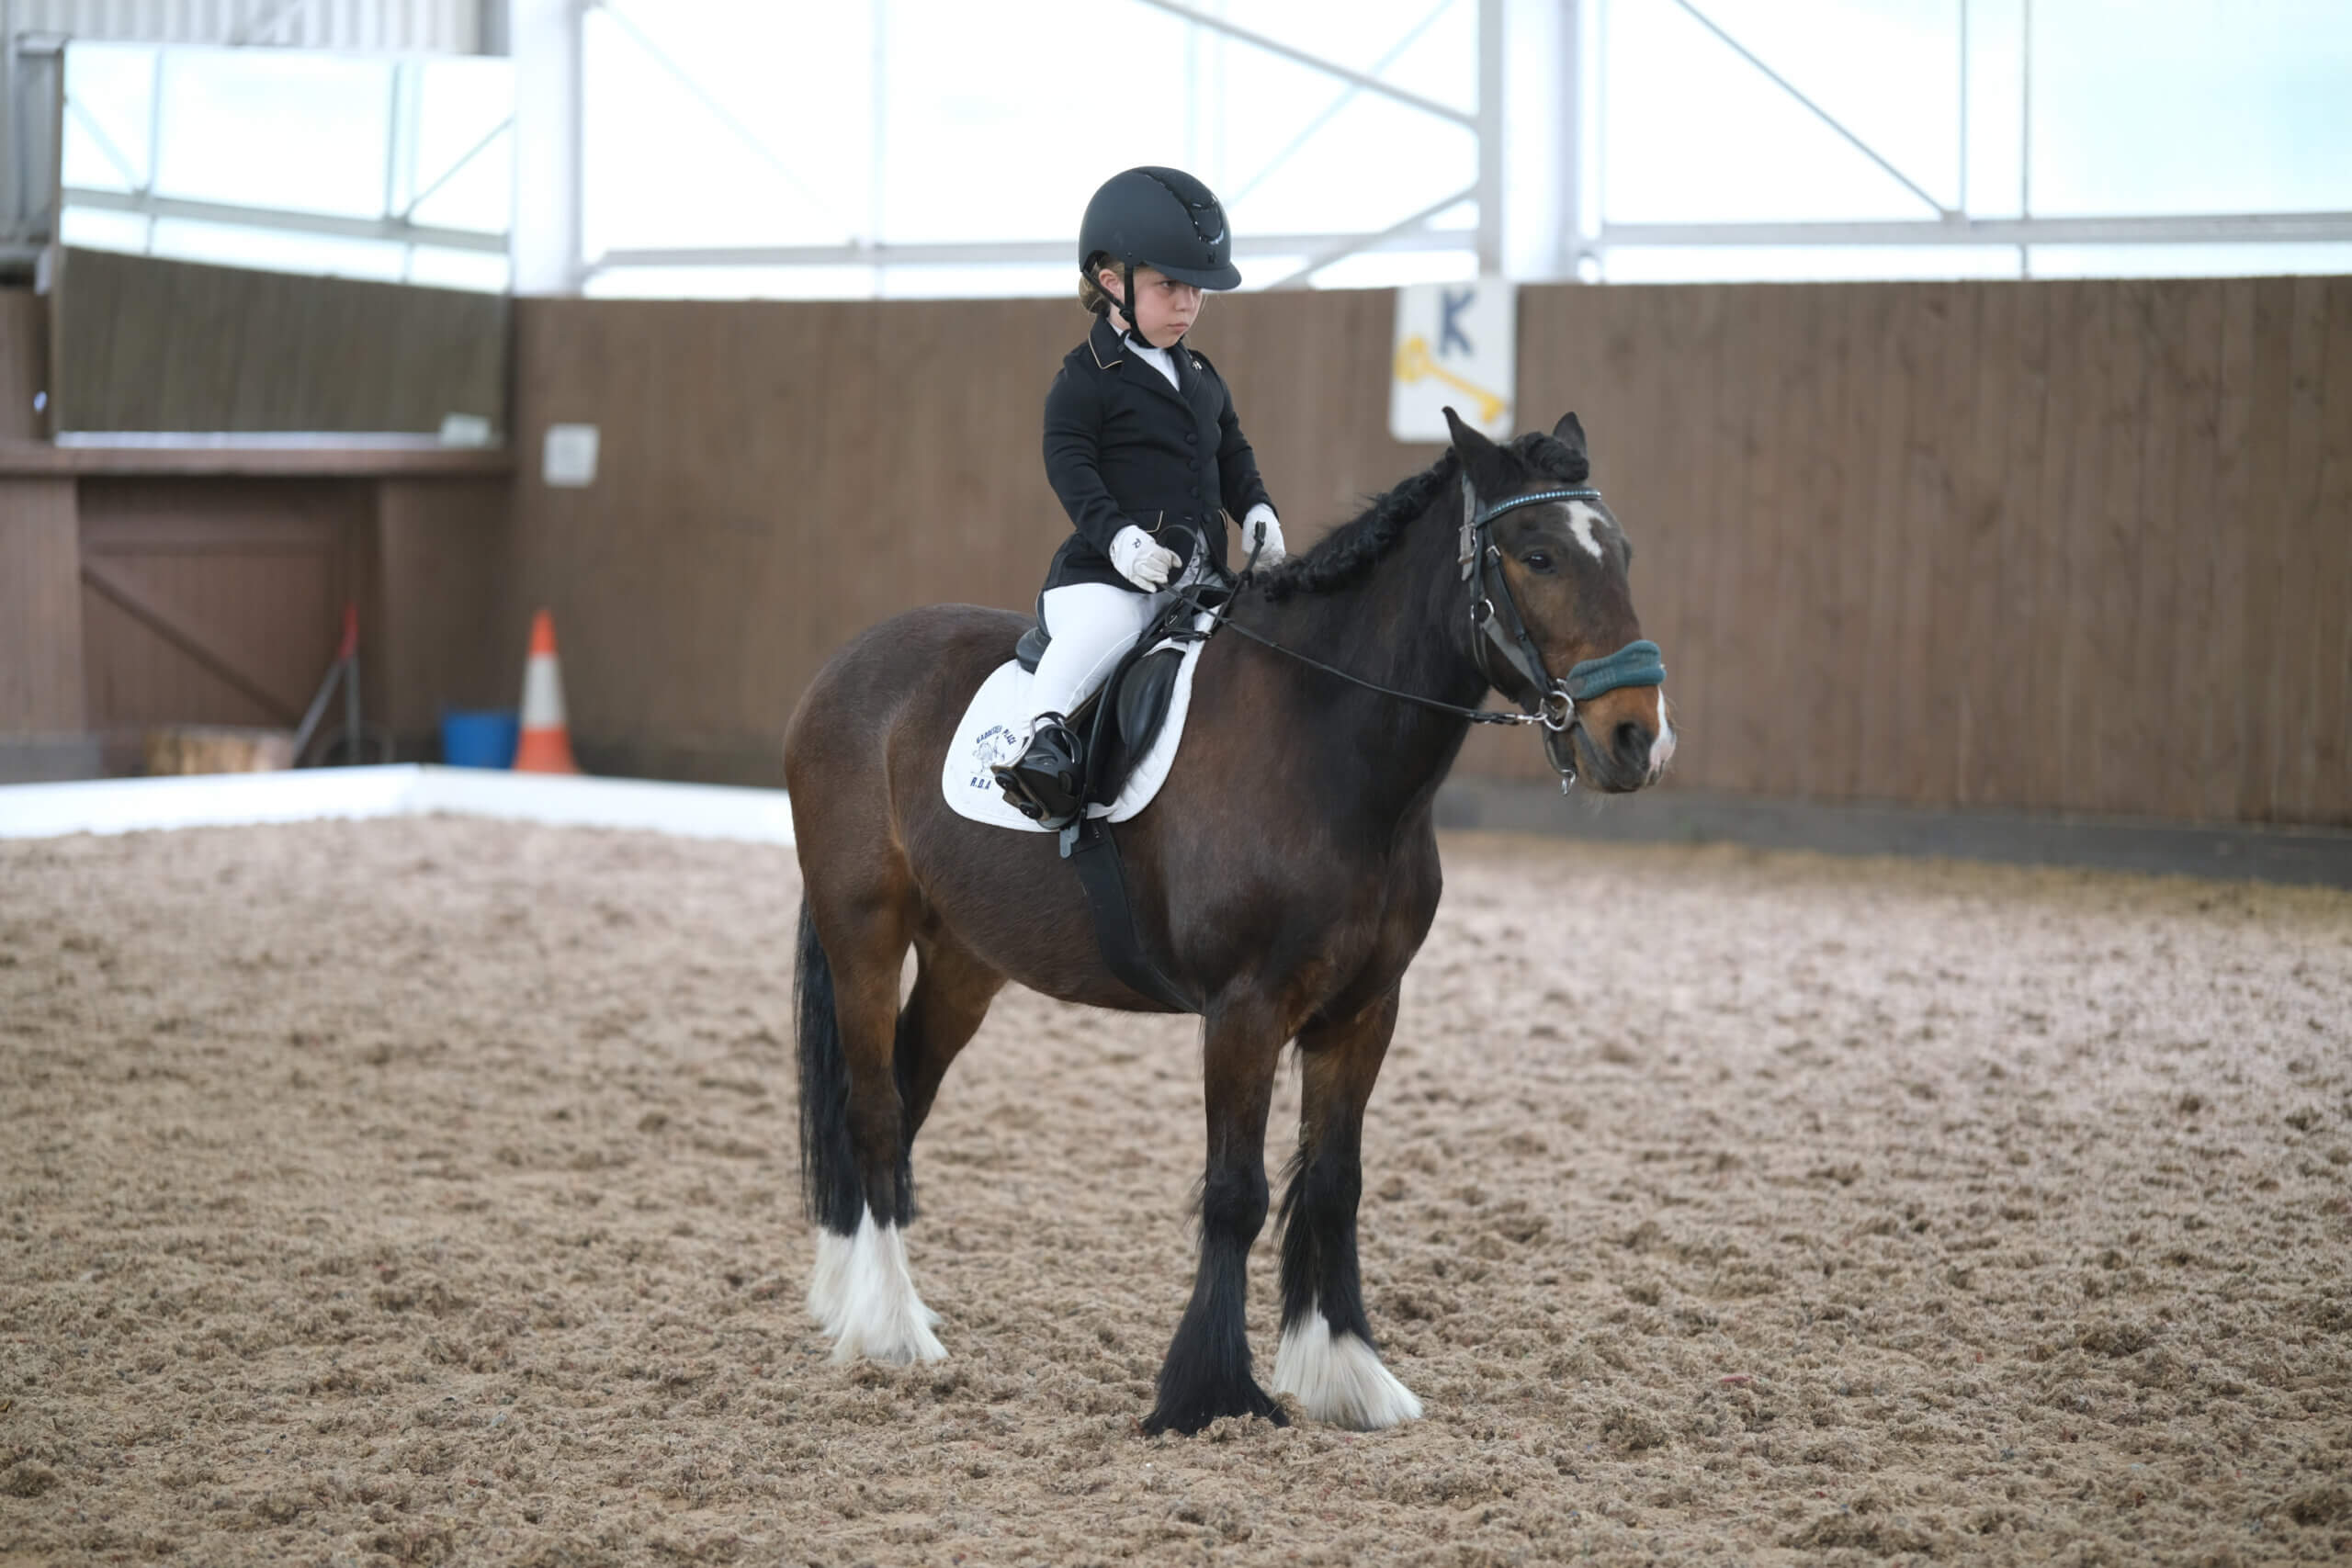 A photo showing a disabled rider showing off her dressage skills